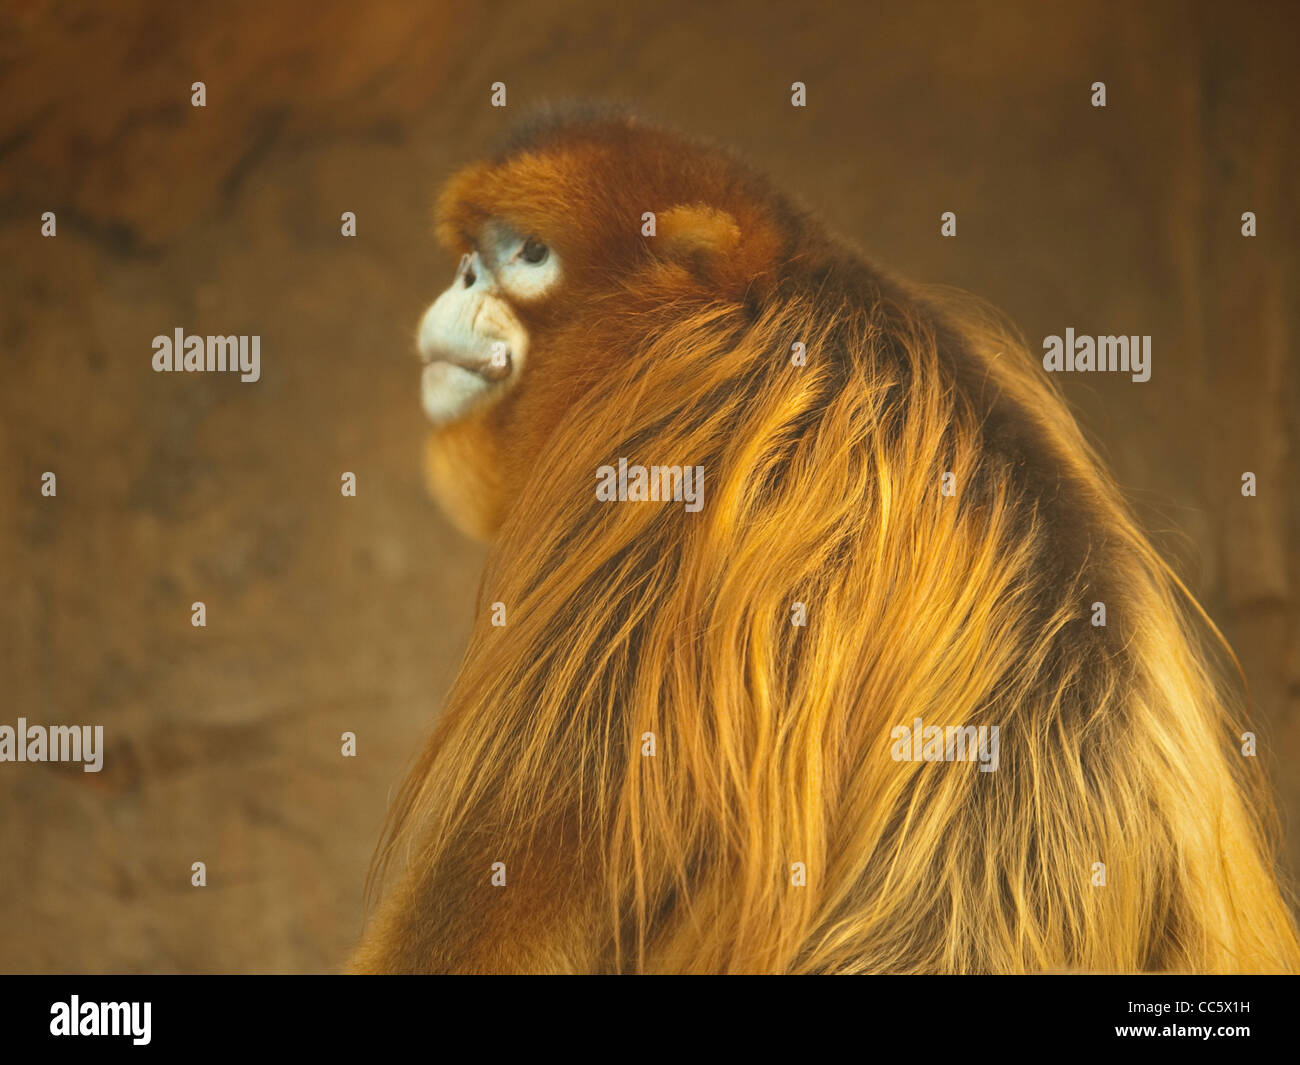 Golden Monkey, Animal sauvage Zoo, Shenzhen, Guangdong, Chine Banque D'Images